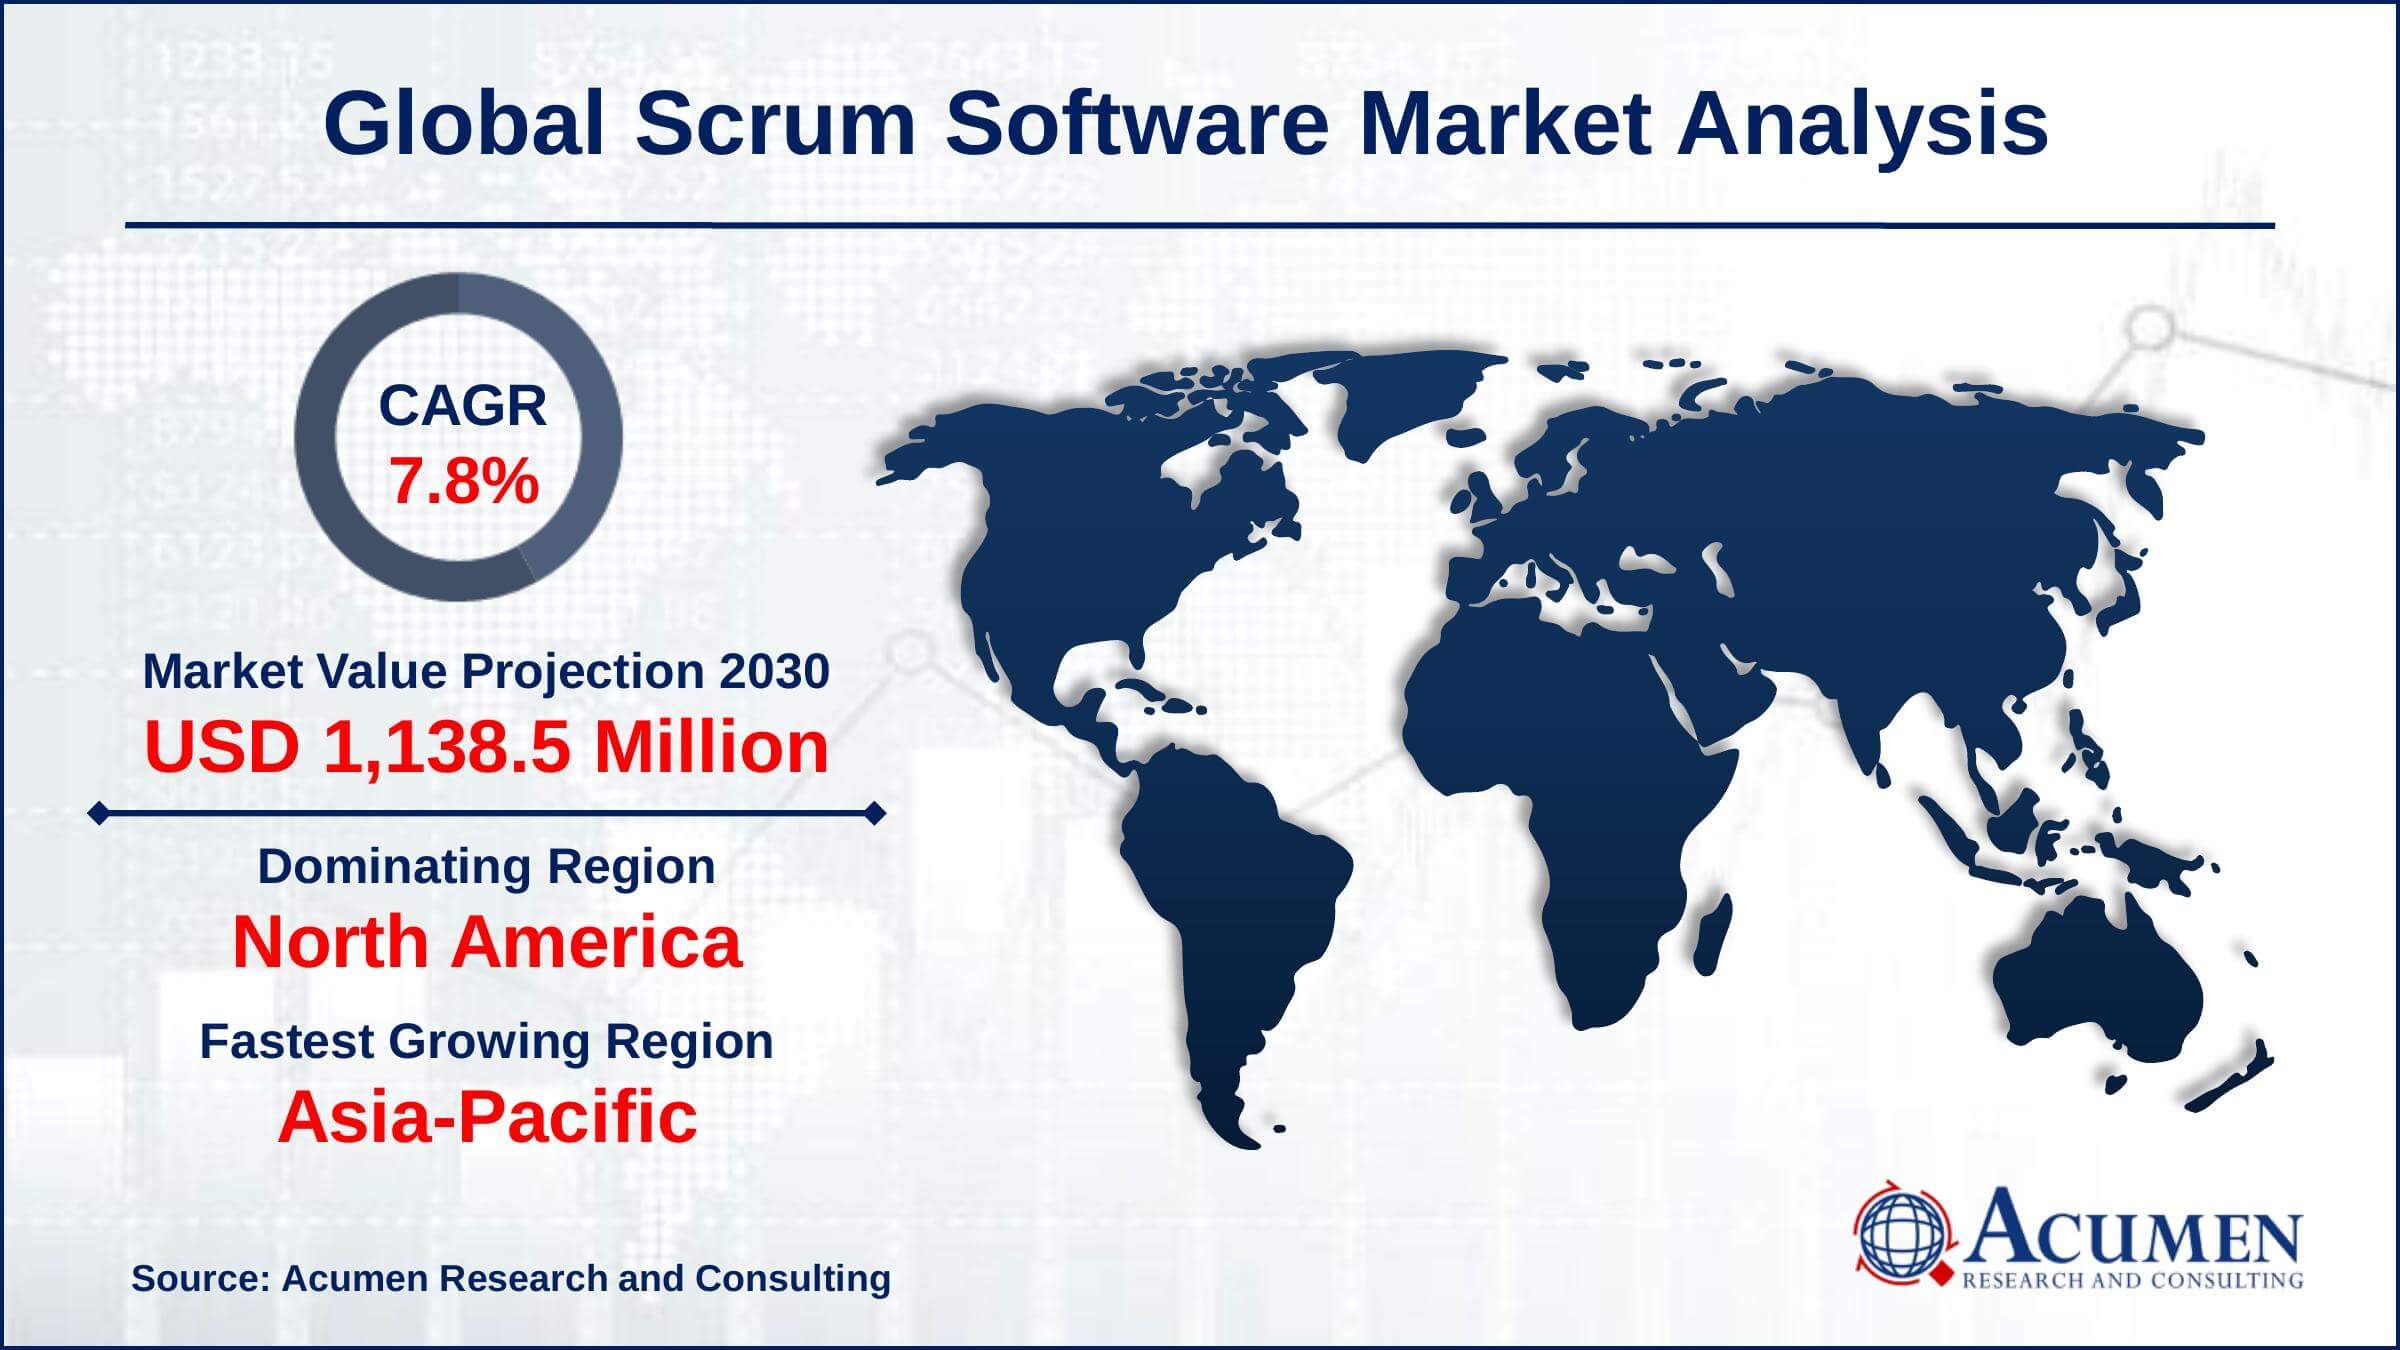 North America scrum software market share gathered more than 40% in 2021